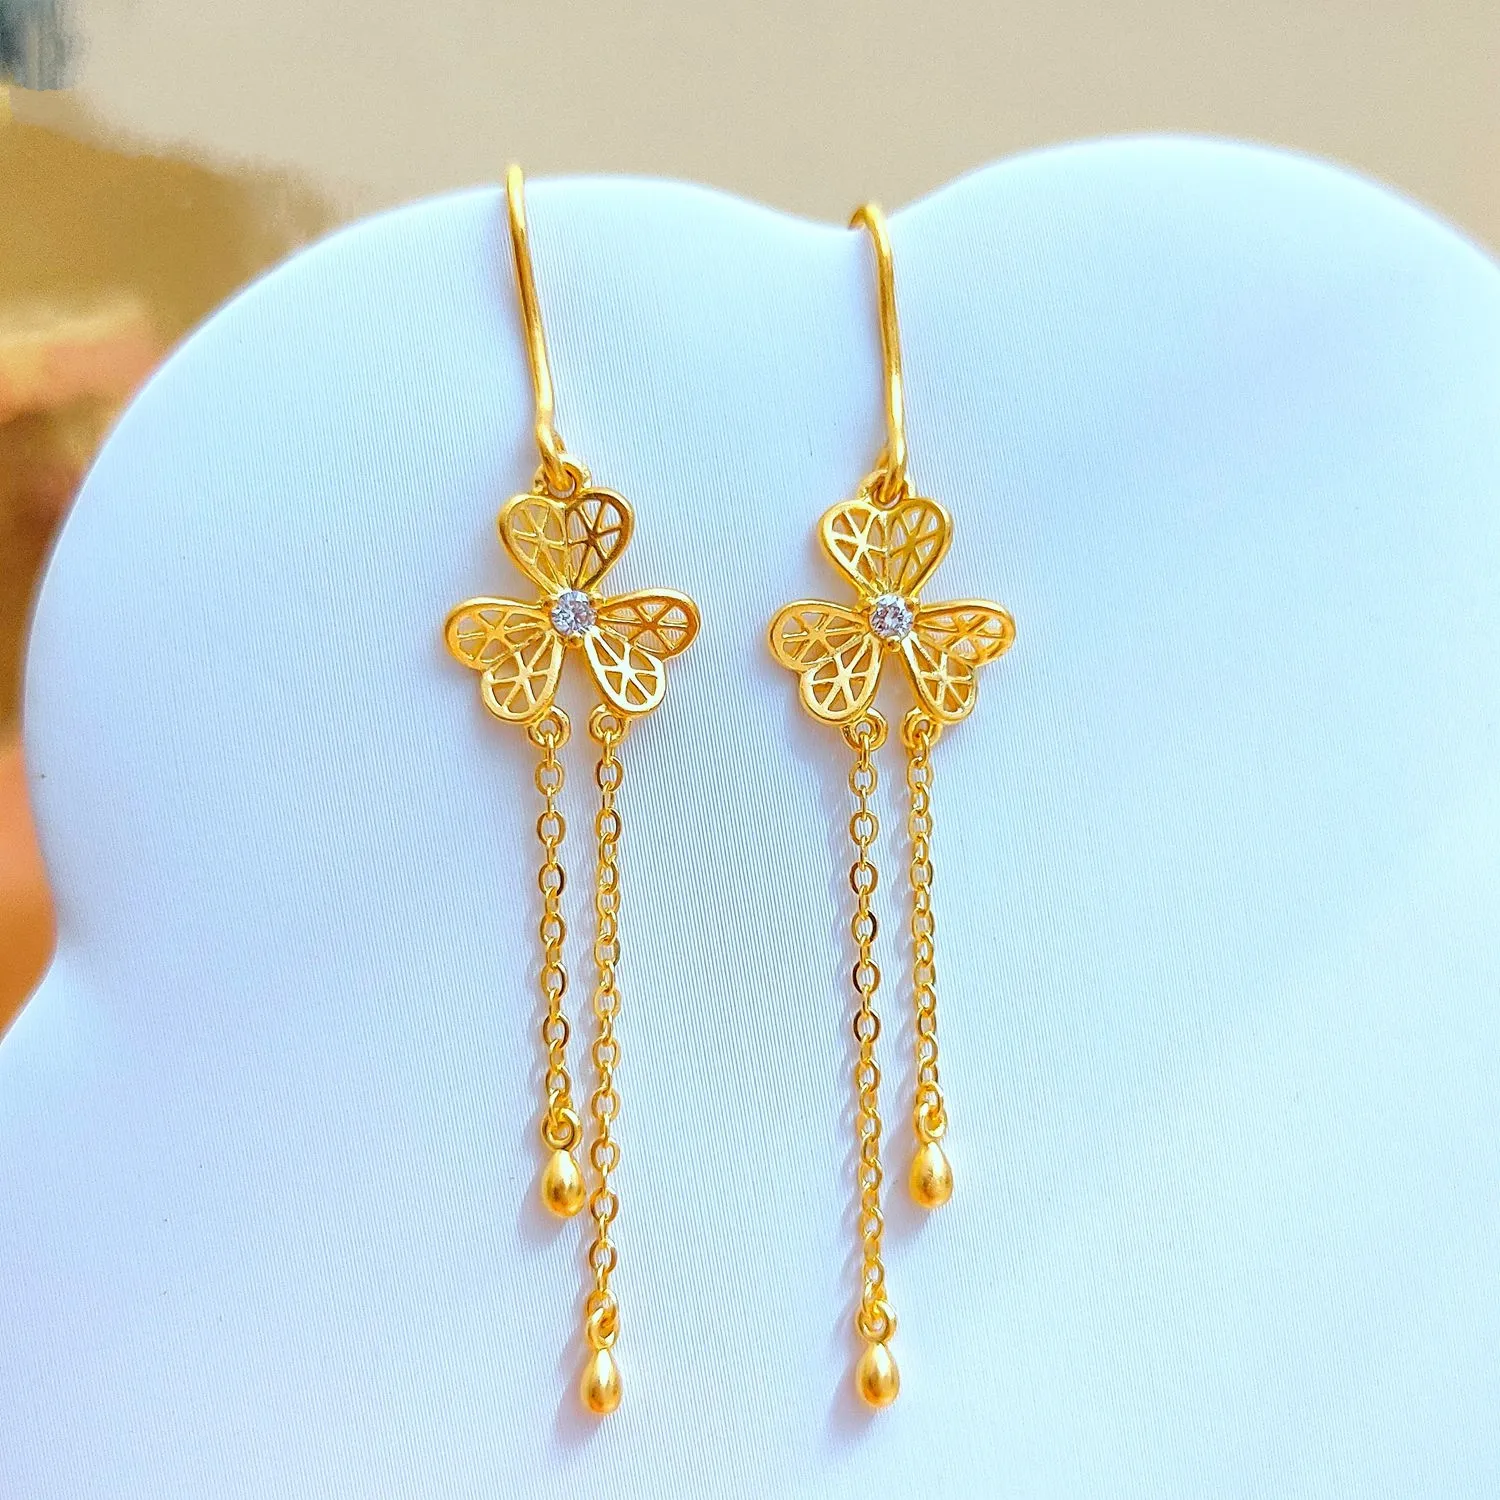 Jingzhanyi Made in China Au999 Gold earrings designed and customized 24K real gold earrings mold processing Gold Earrings OEM